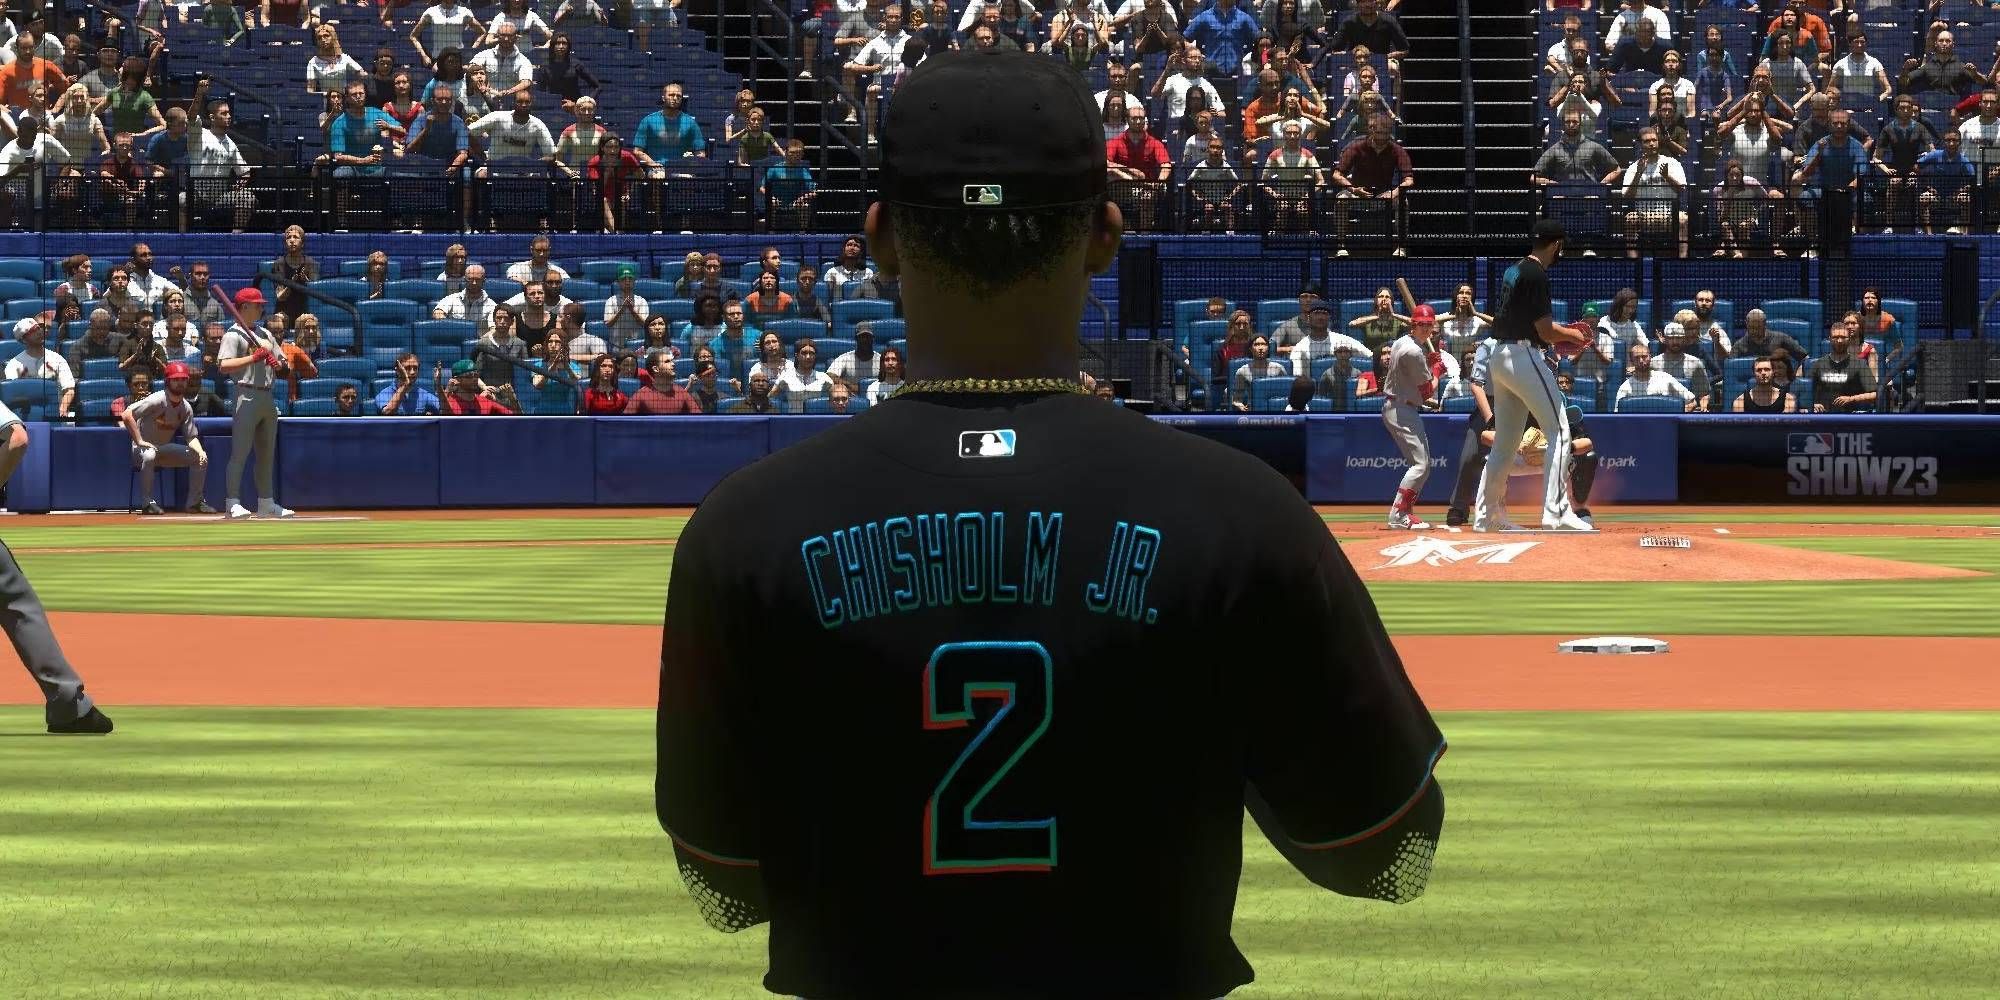 MLB The Show 23 Jazz Chisholm Jr. for Miami Marlins as one of Best Center Fielders